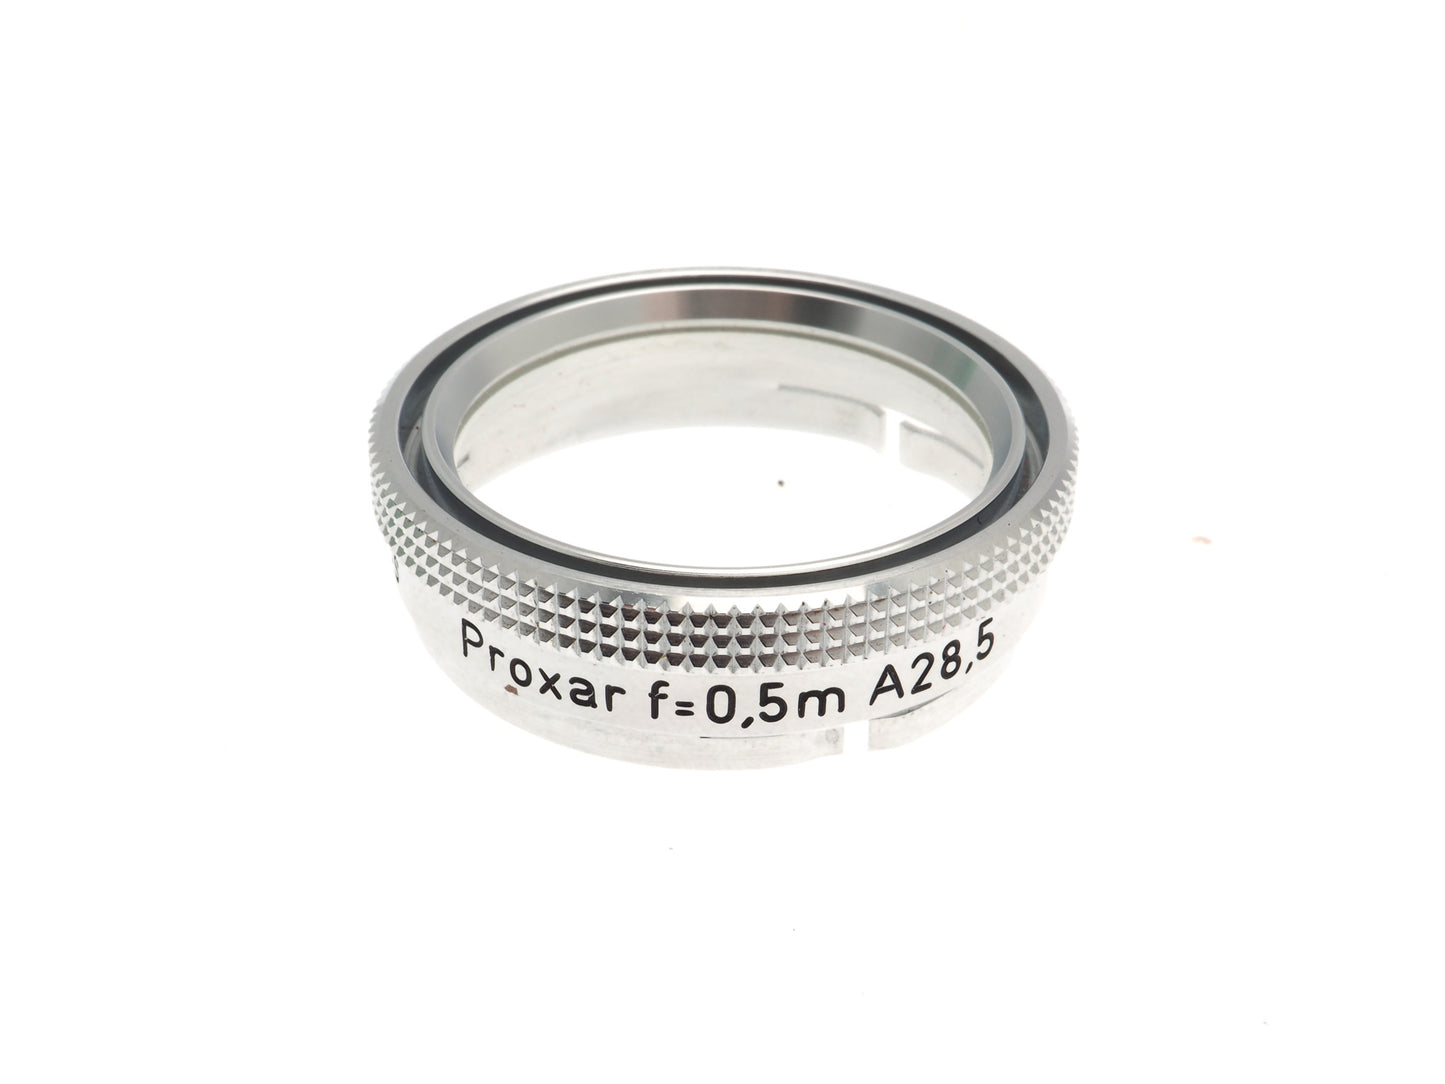 Carl Zeiss 28.5mm Push-On Proxar Filter f=0.5m - Accessory